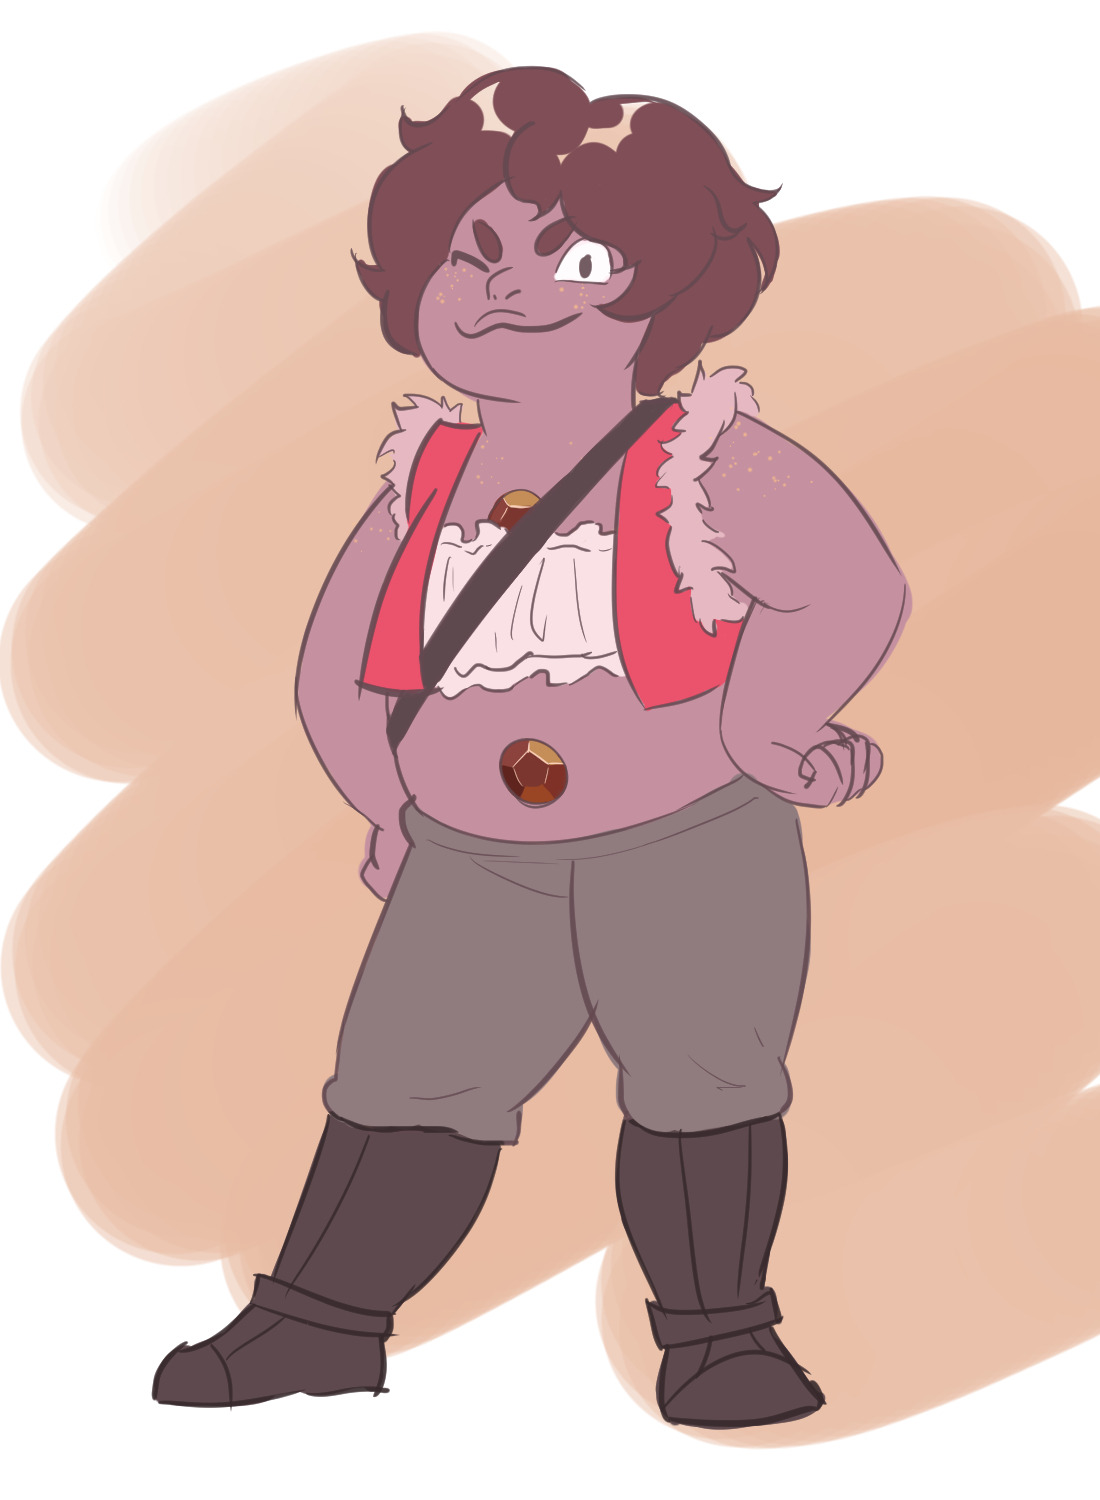 gnarlychimes said: Could you make a Smoky Quartz genie? Answer: Hhhmm not really feeling genies anymore but I AM feeling more Pirates!